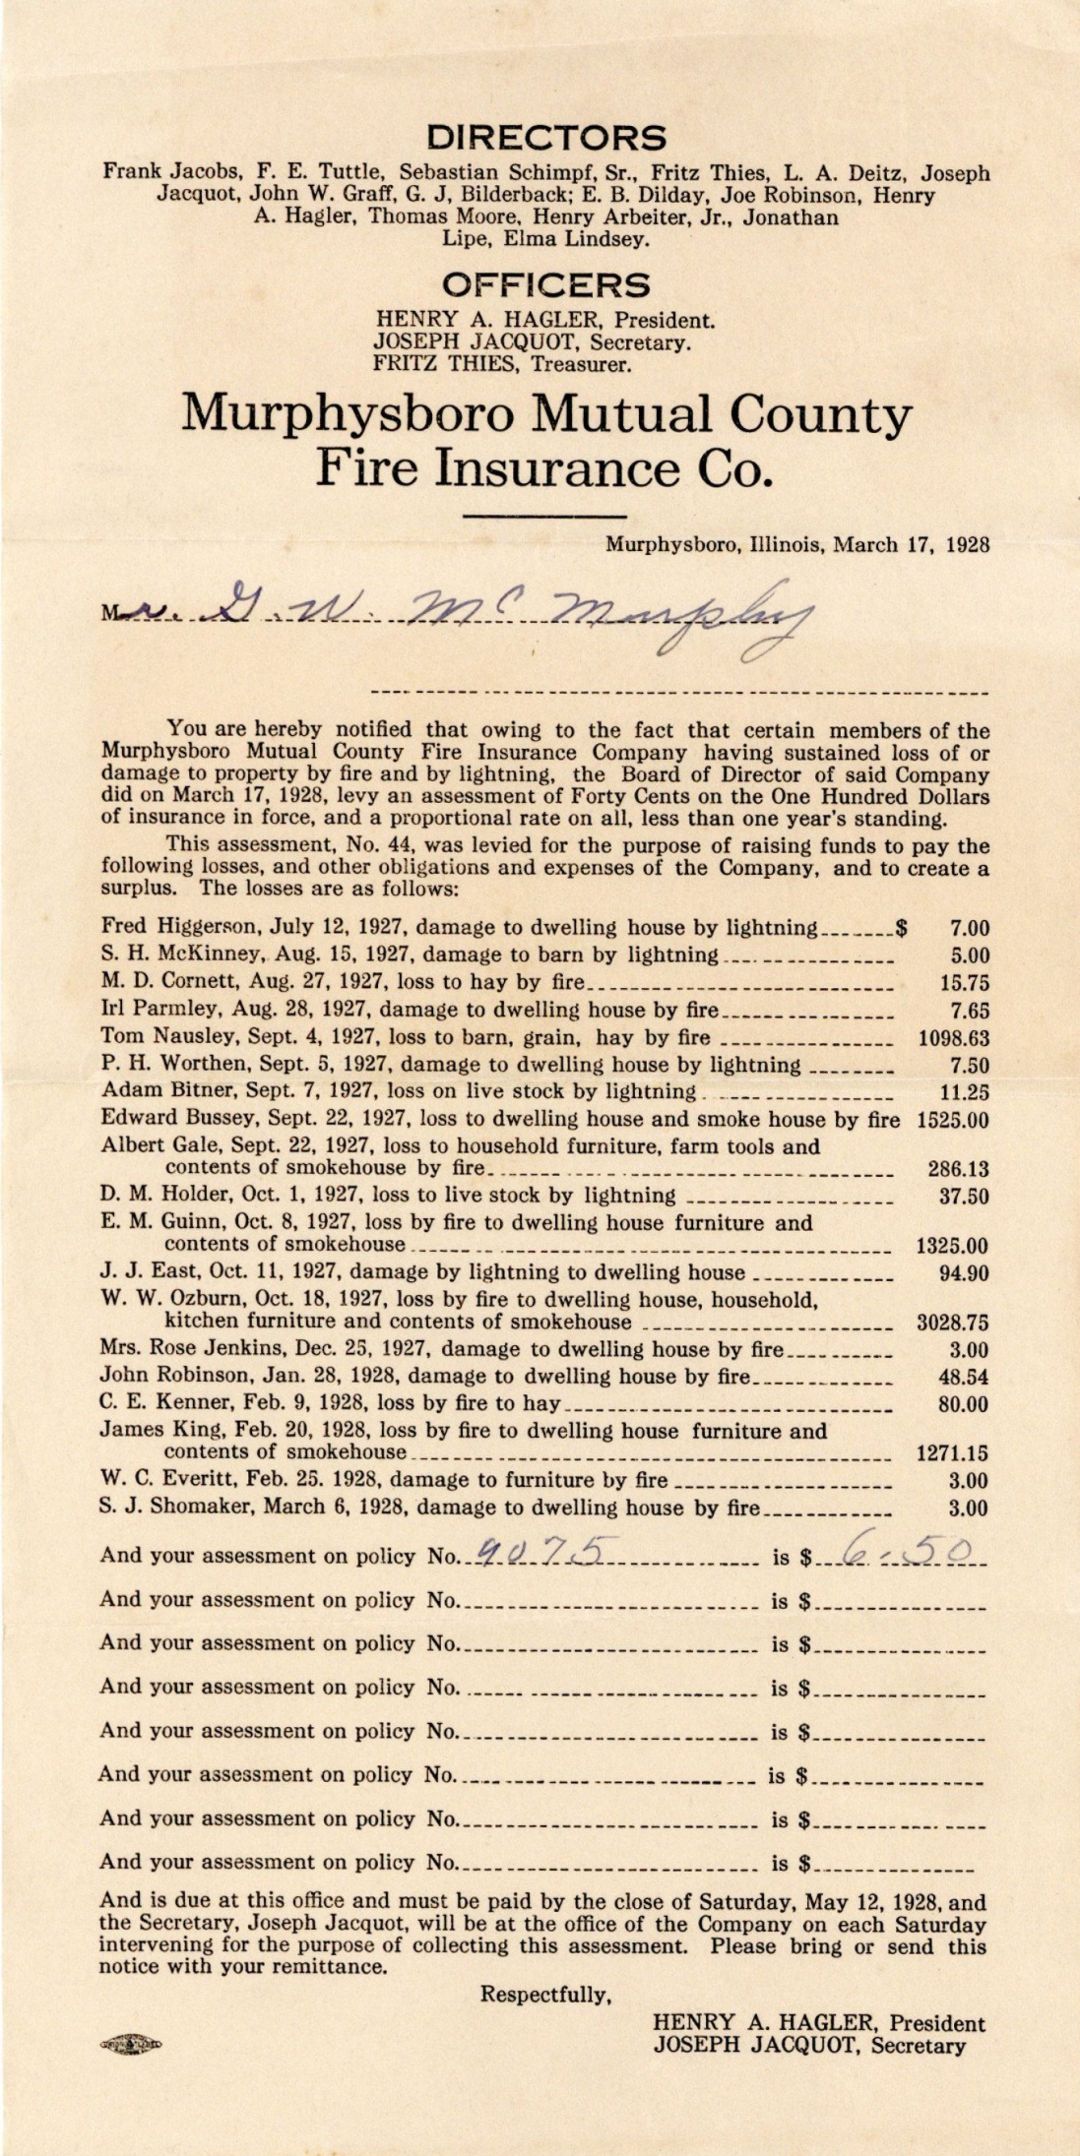 Assessment on policy of Murphysboro Mutual County Fire Insurance Co. dated 1928 -  Insurance